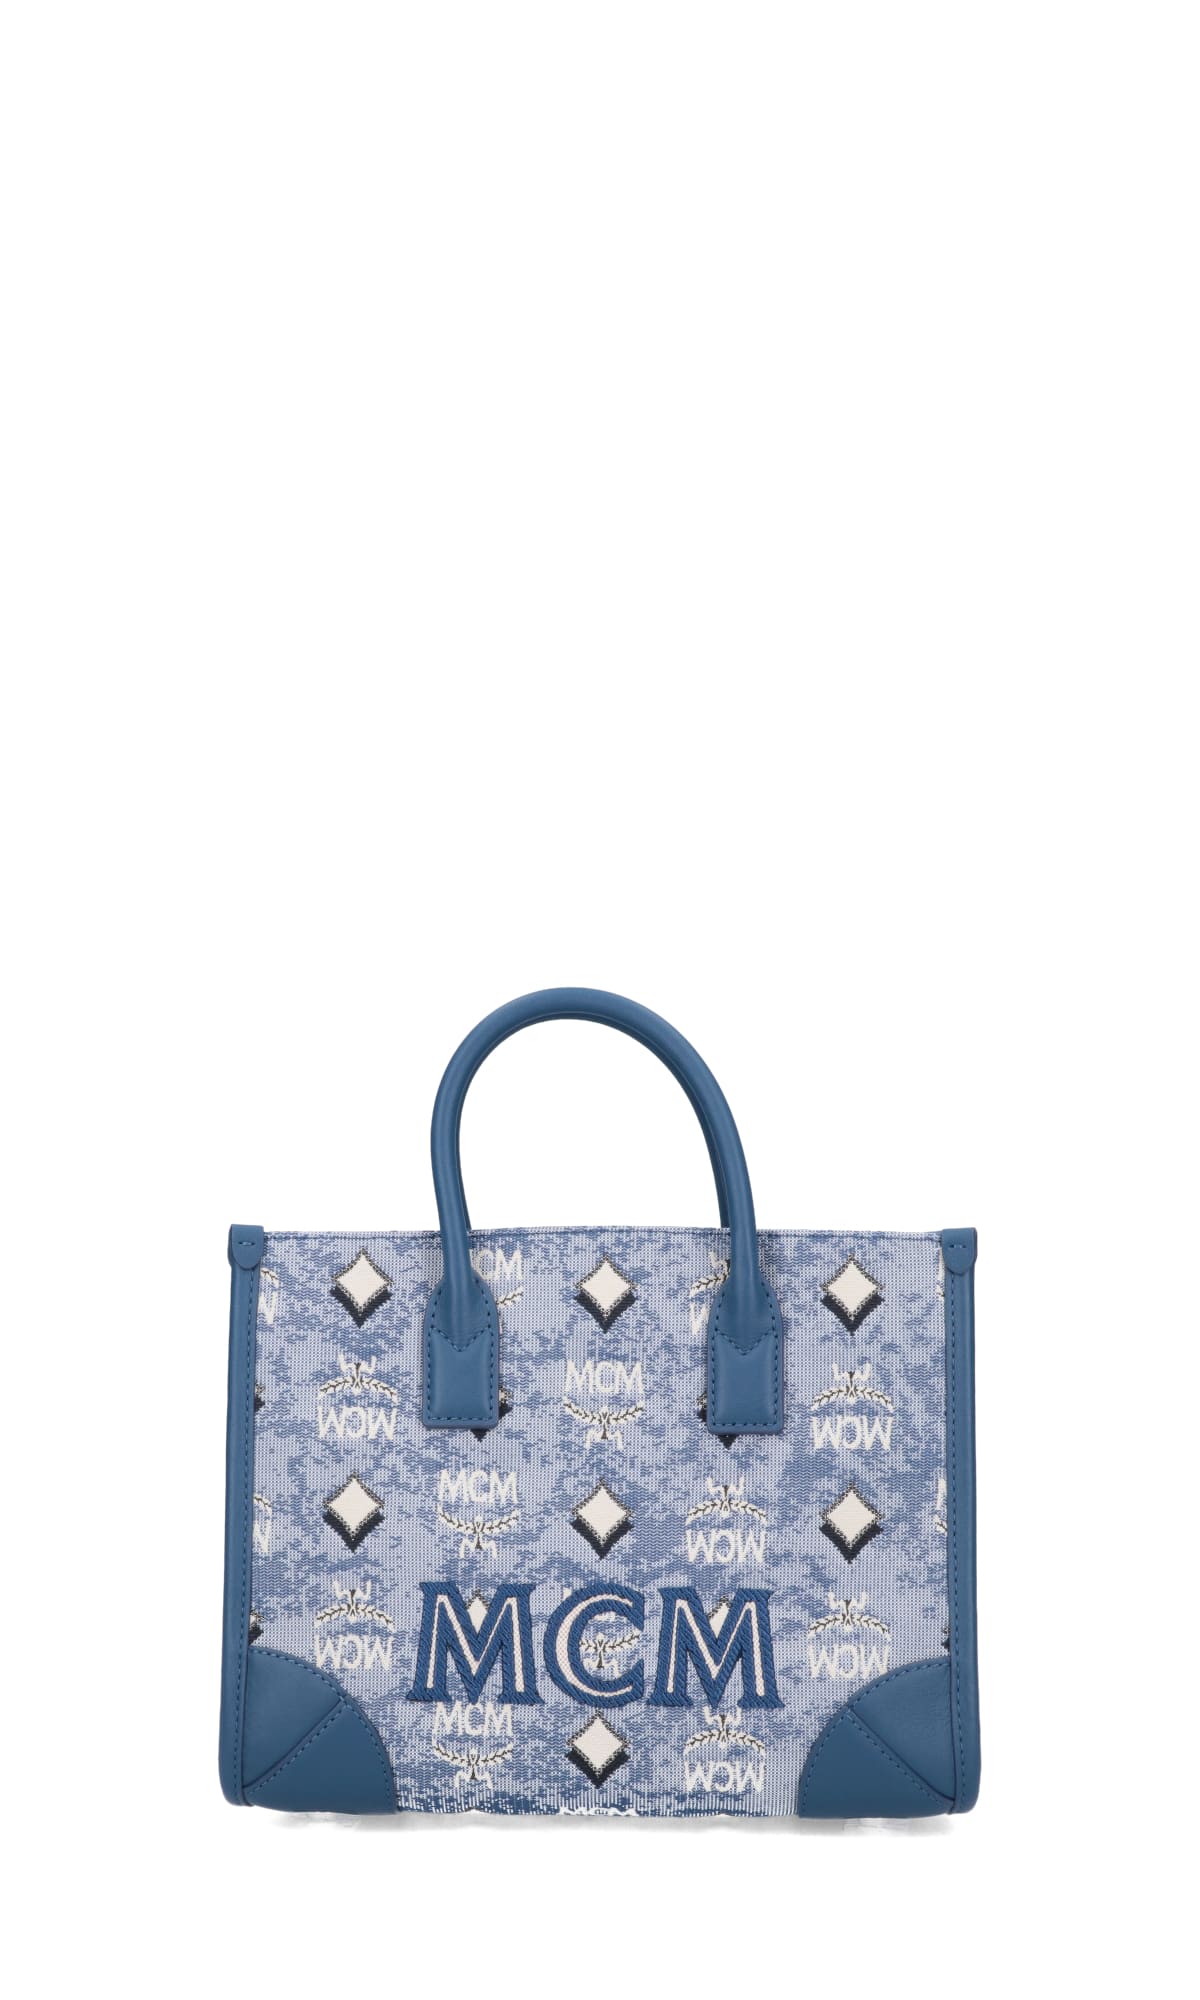 Mcm Tote In Light Blue